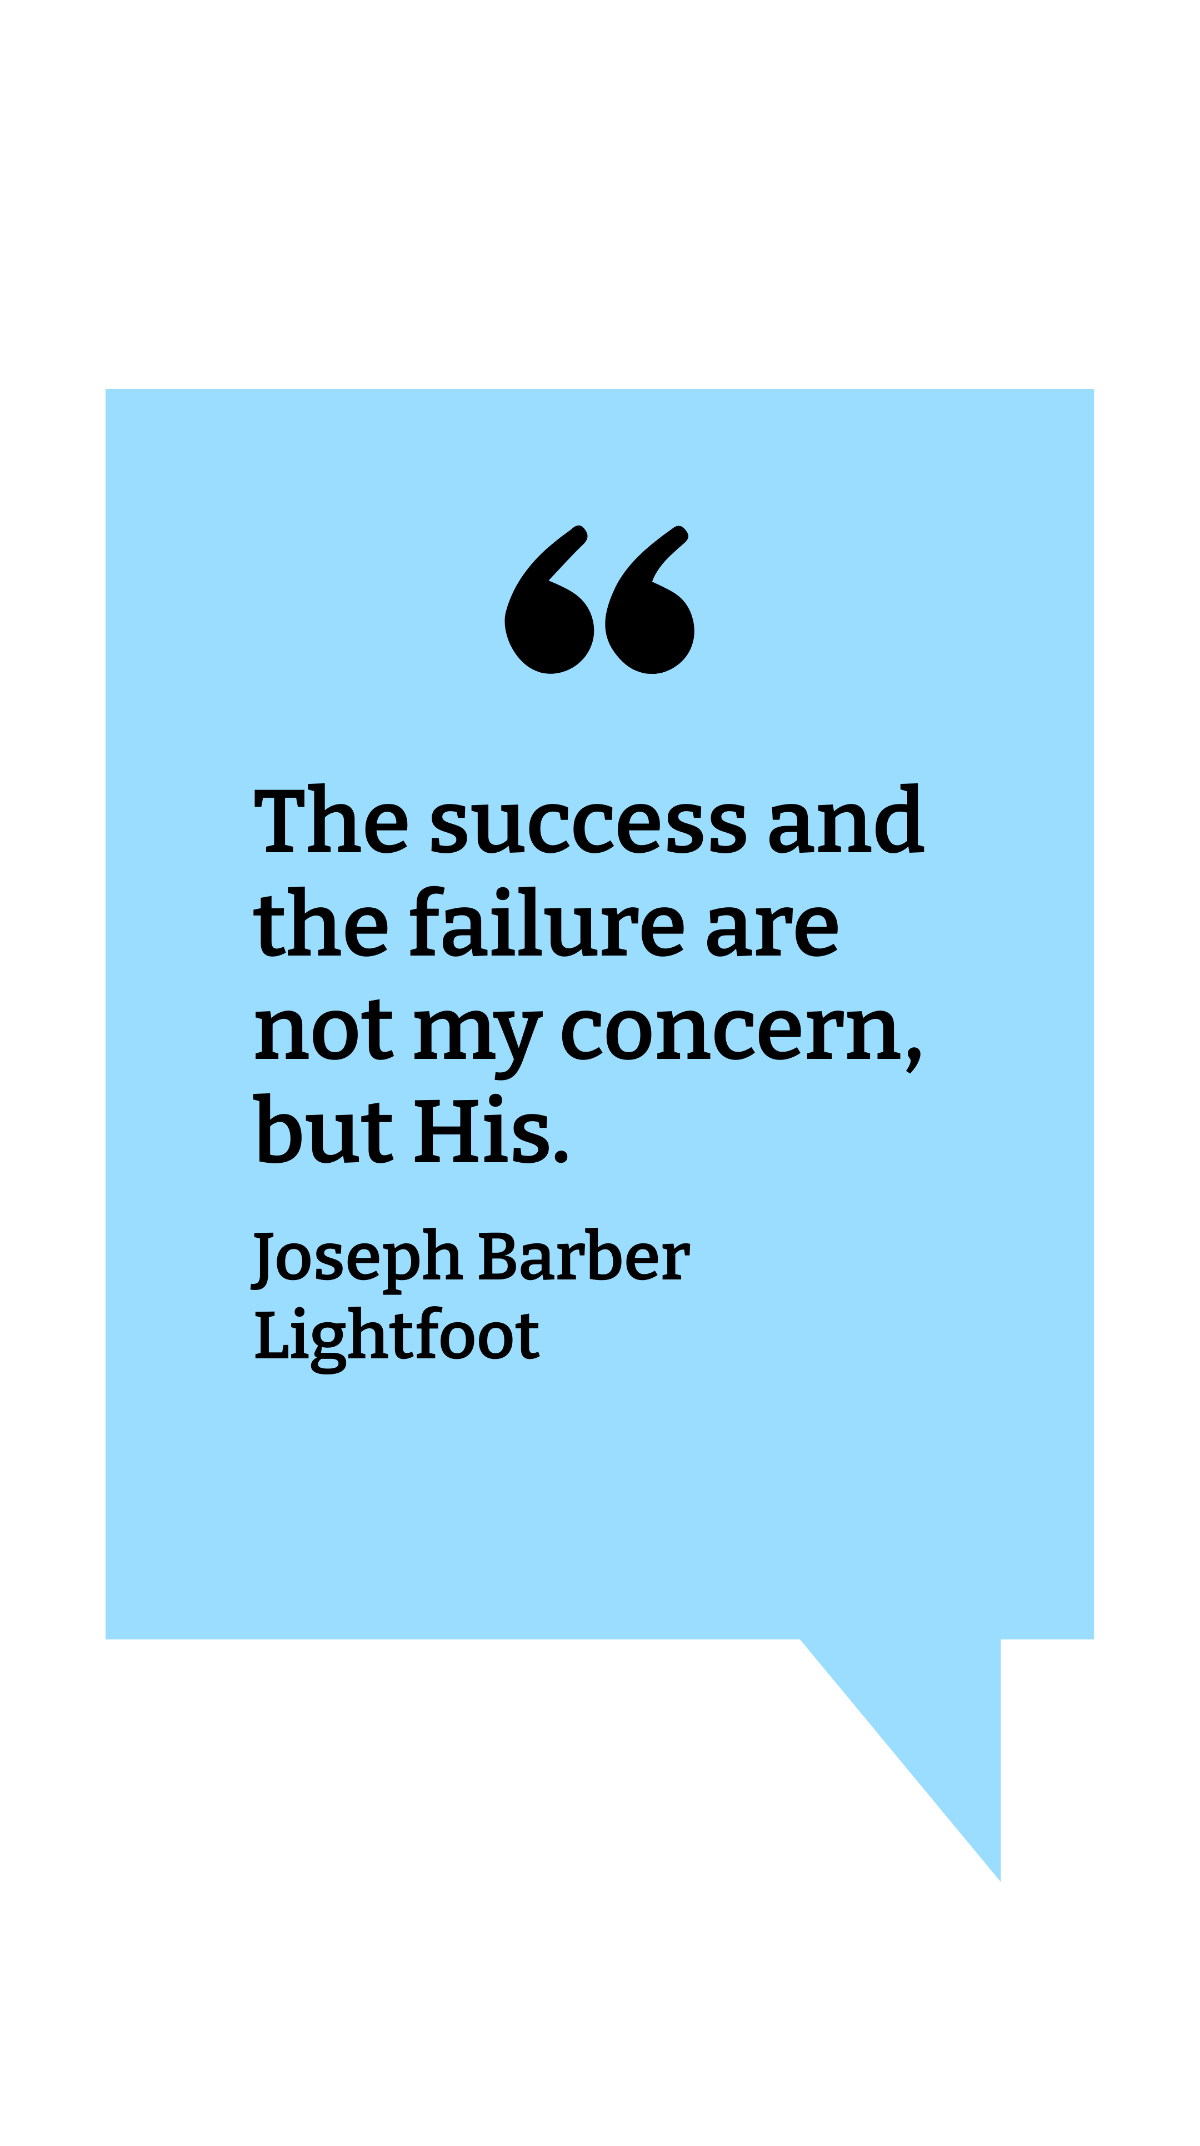 Free Joseph Barber Lightfoot - The success and the failure are not my concern, but His. Template